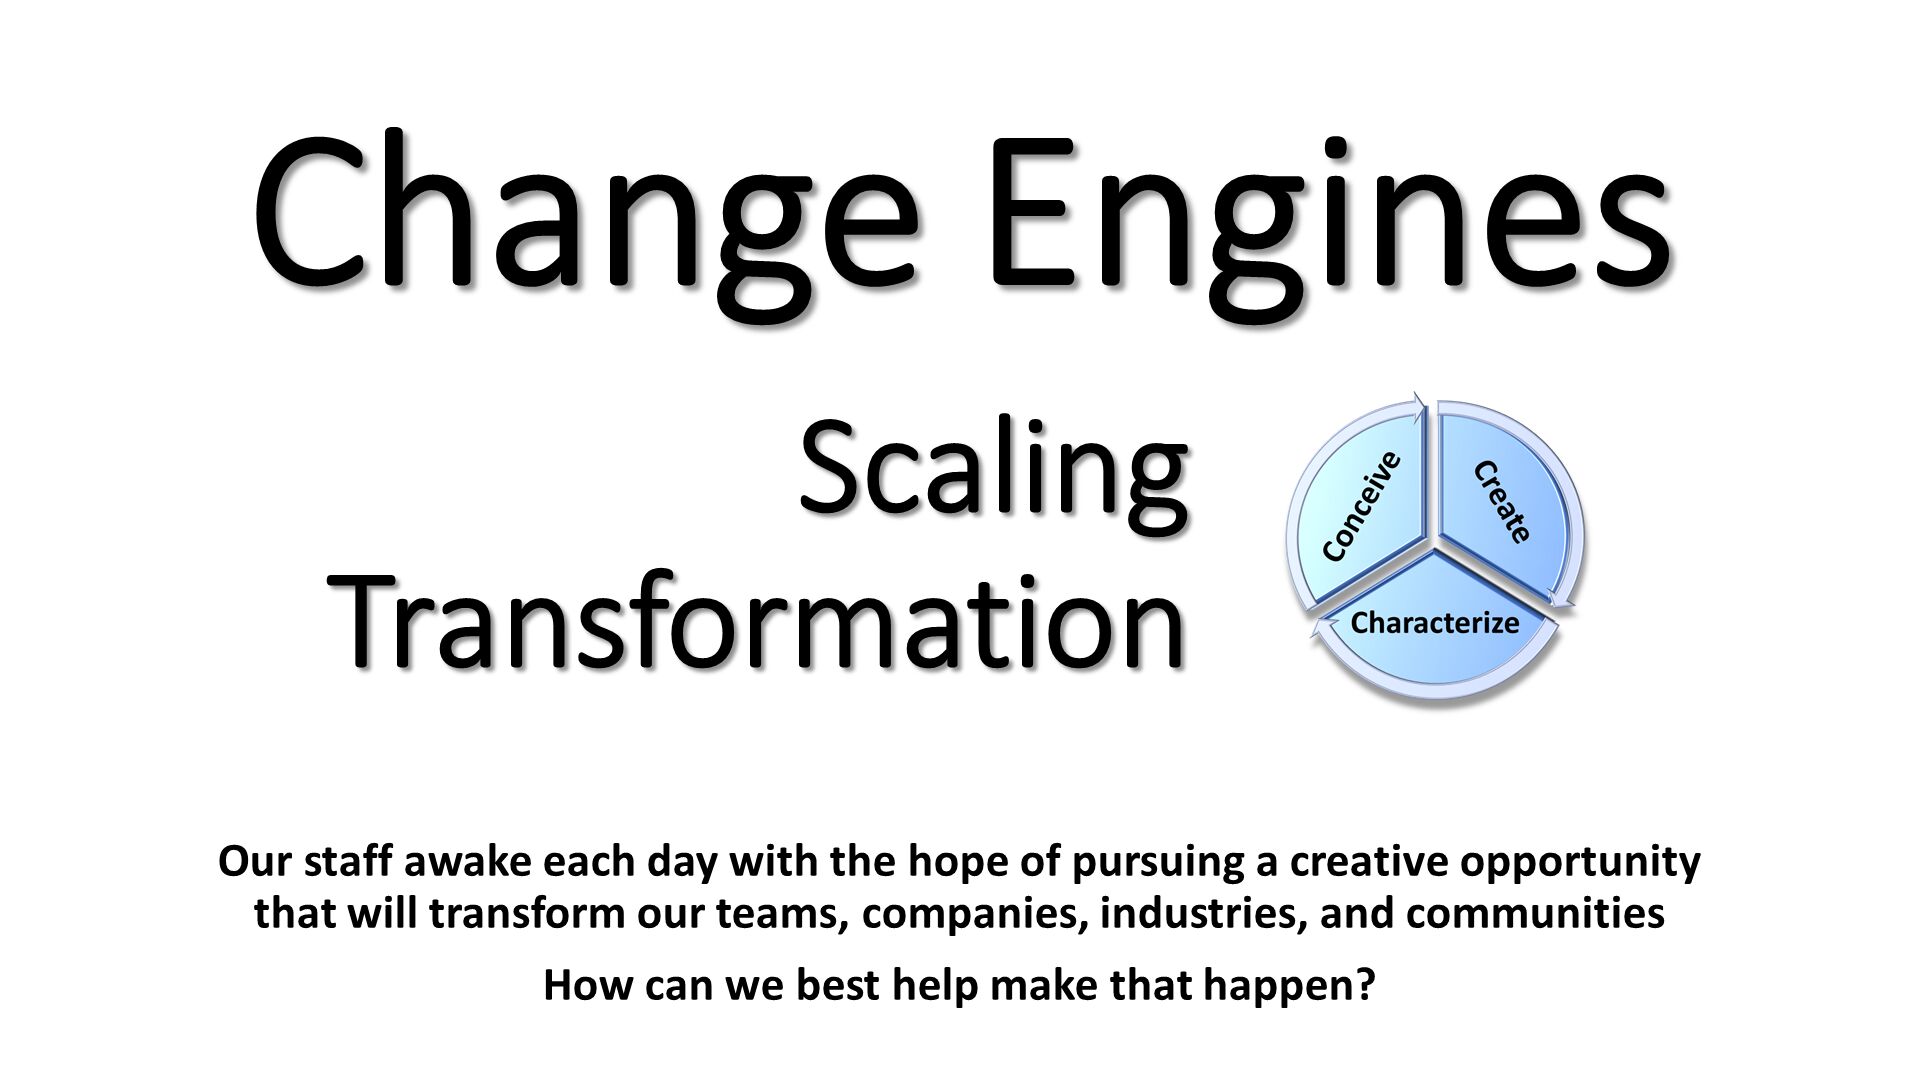 Change Engines. Our staff awake each day with the hope of pursuing a creative opportunity that will transform our teams, companies, industries, and communities
How can we best help make that happen?. 